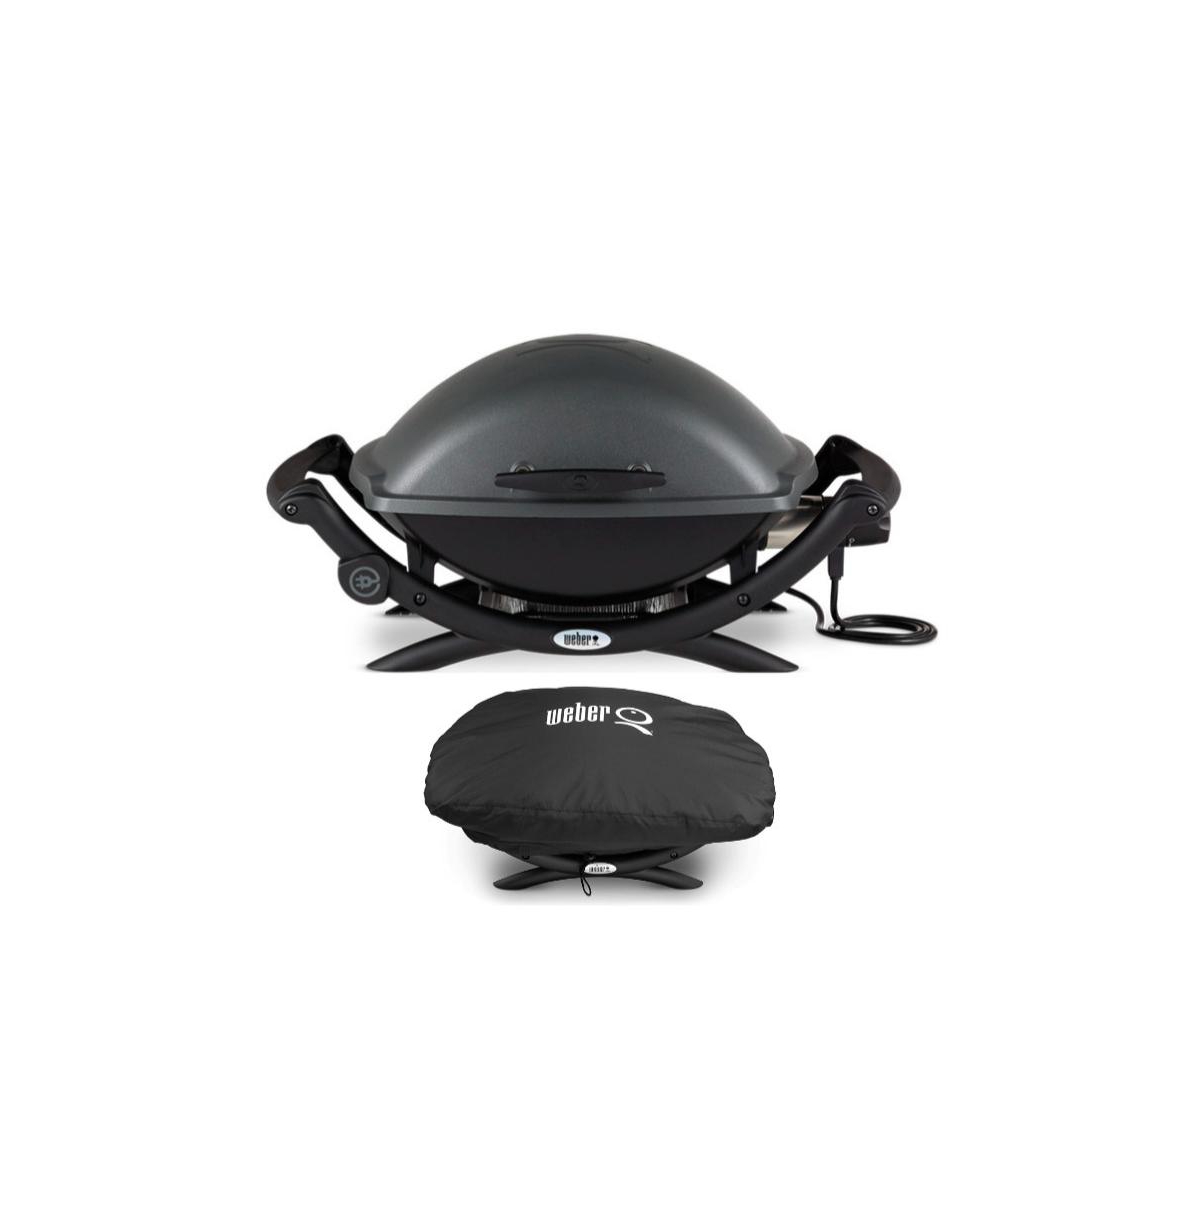 Q 2400 Electric Grill (Black) with Grill Cover Bundle - Black